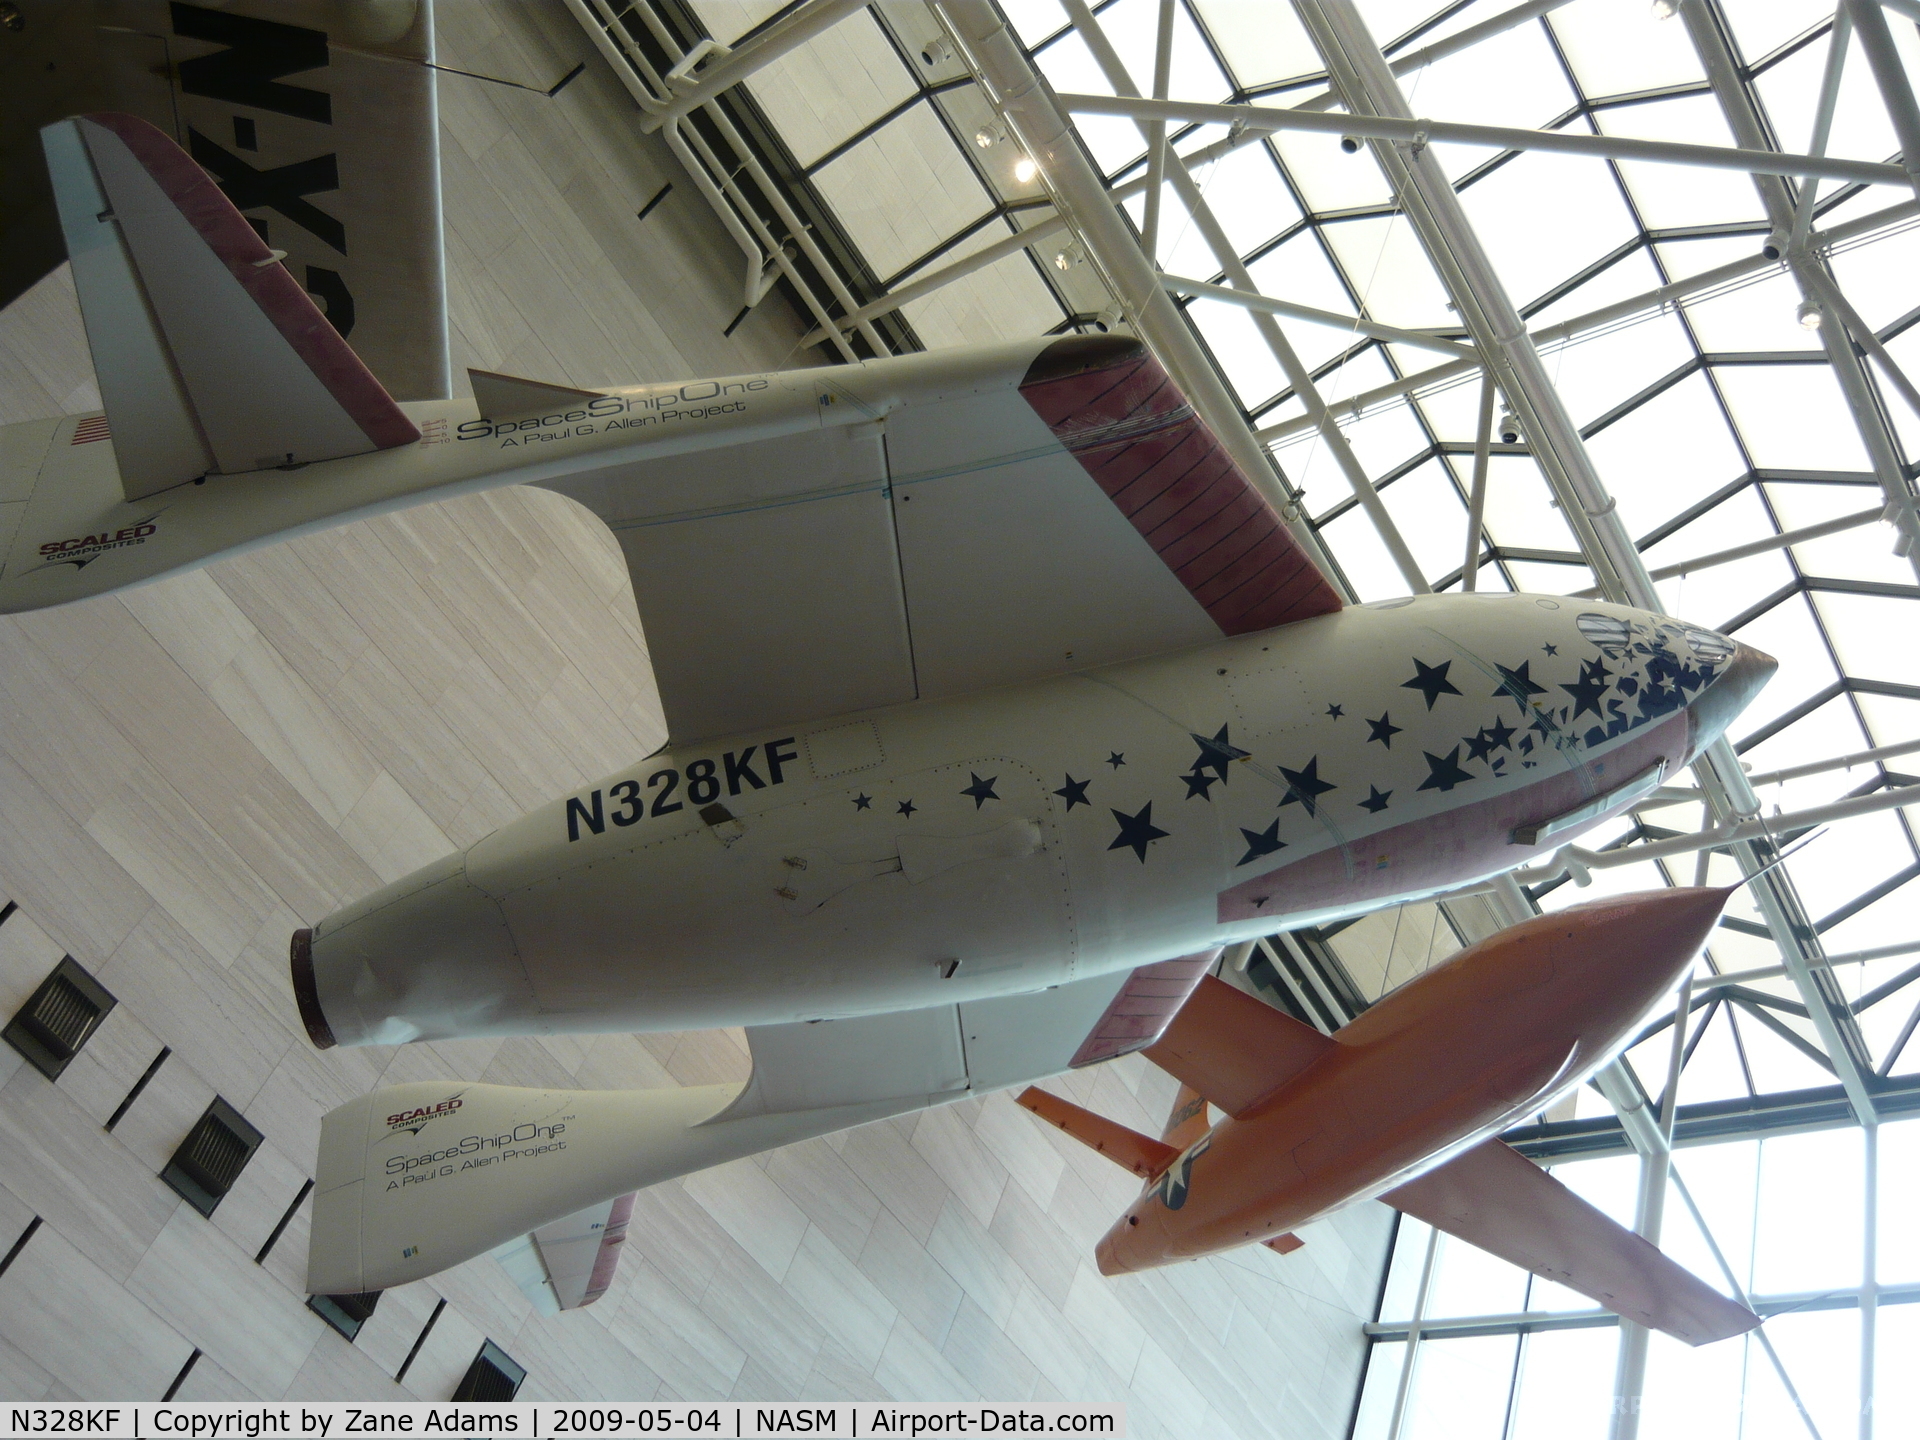 N328KF, 2003 Scaled Composites 316 C/N 001, Spaceship One at the NASM - Taken by my son.